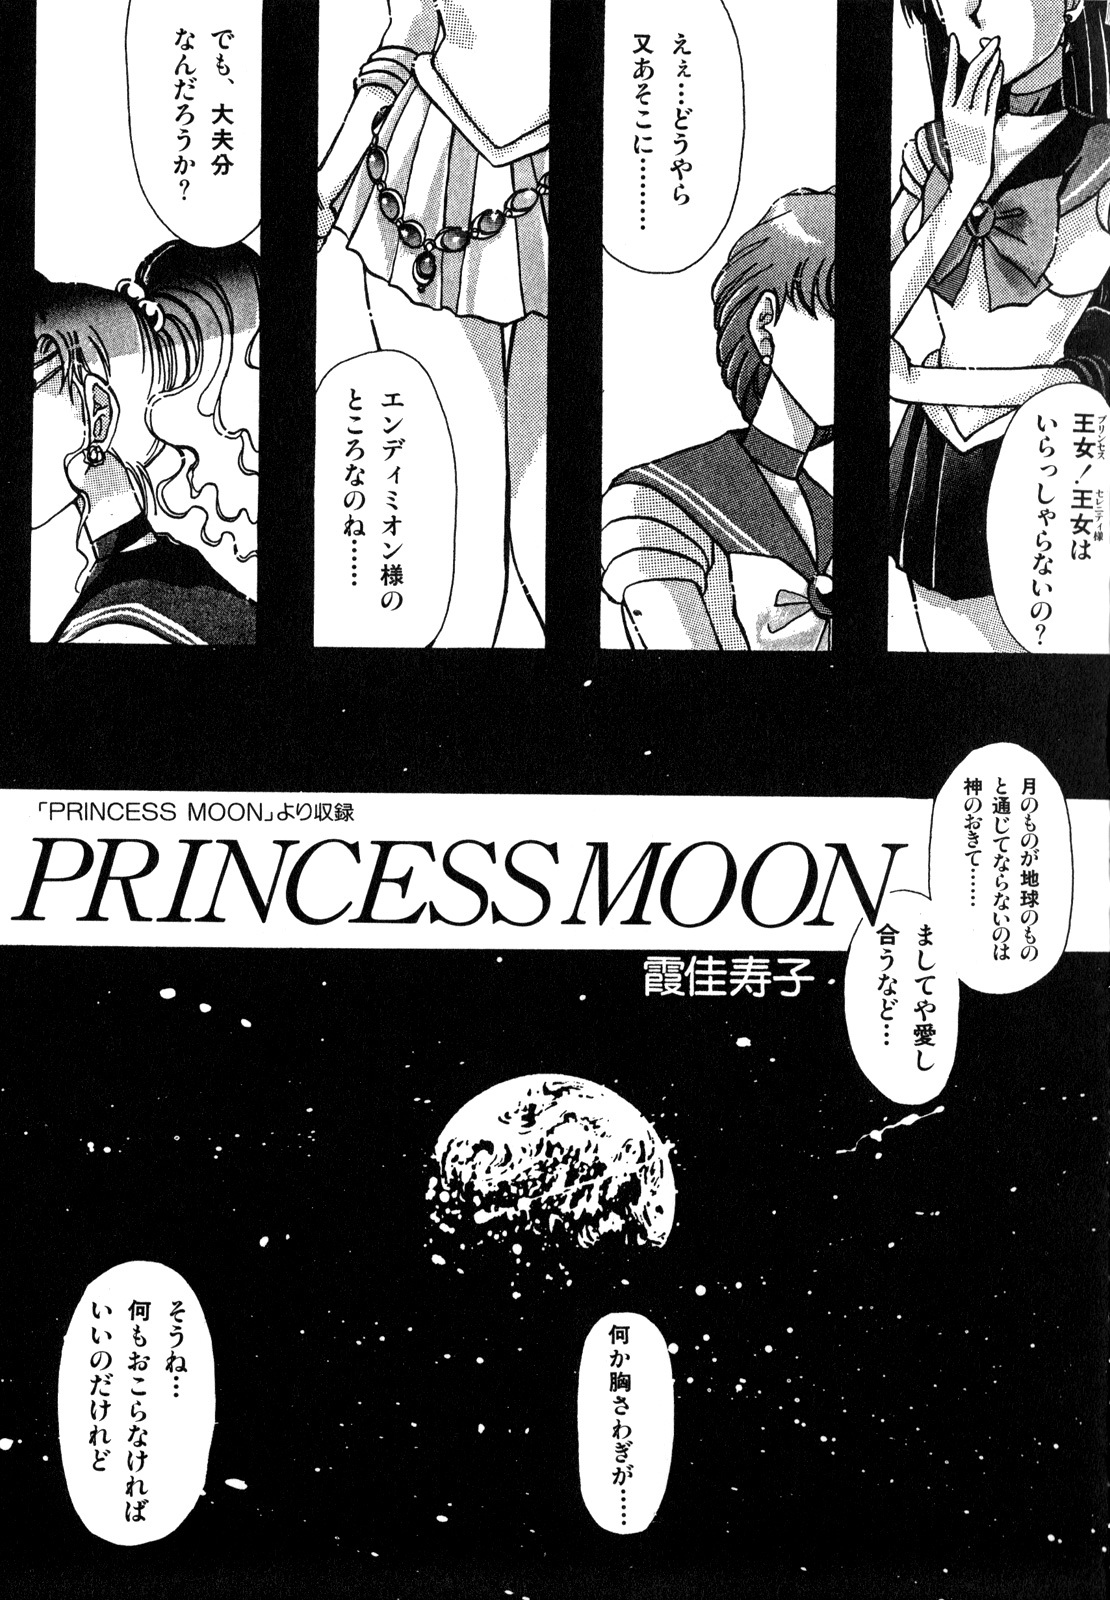 [Anthology] Lunatic Party 1 (Sailor Moon) page 44 full